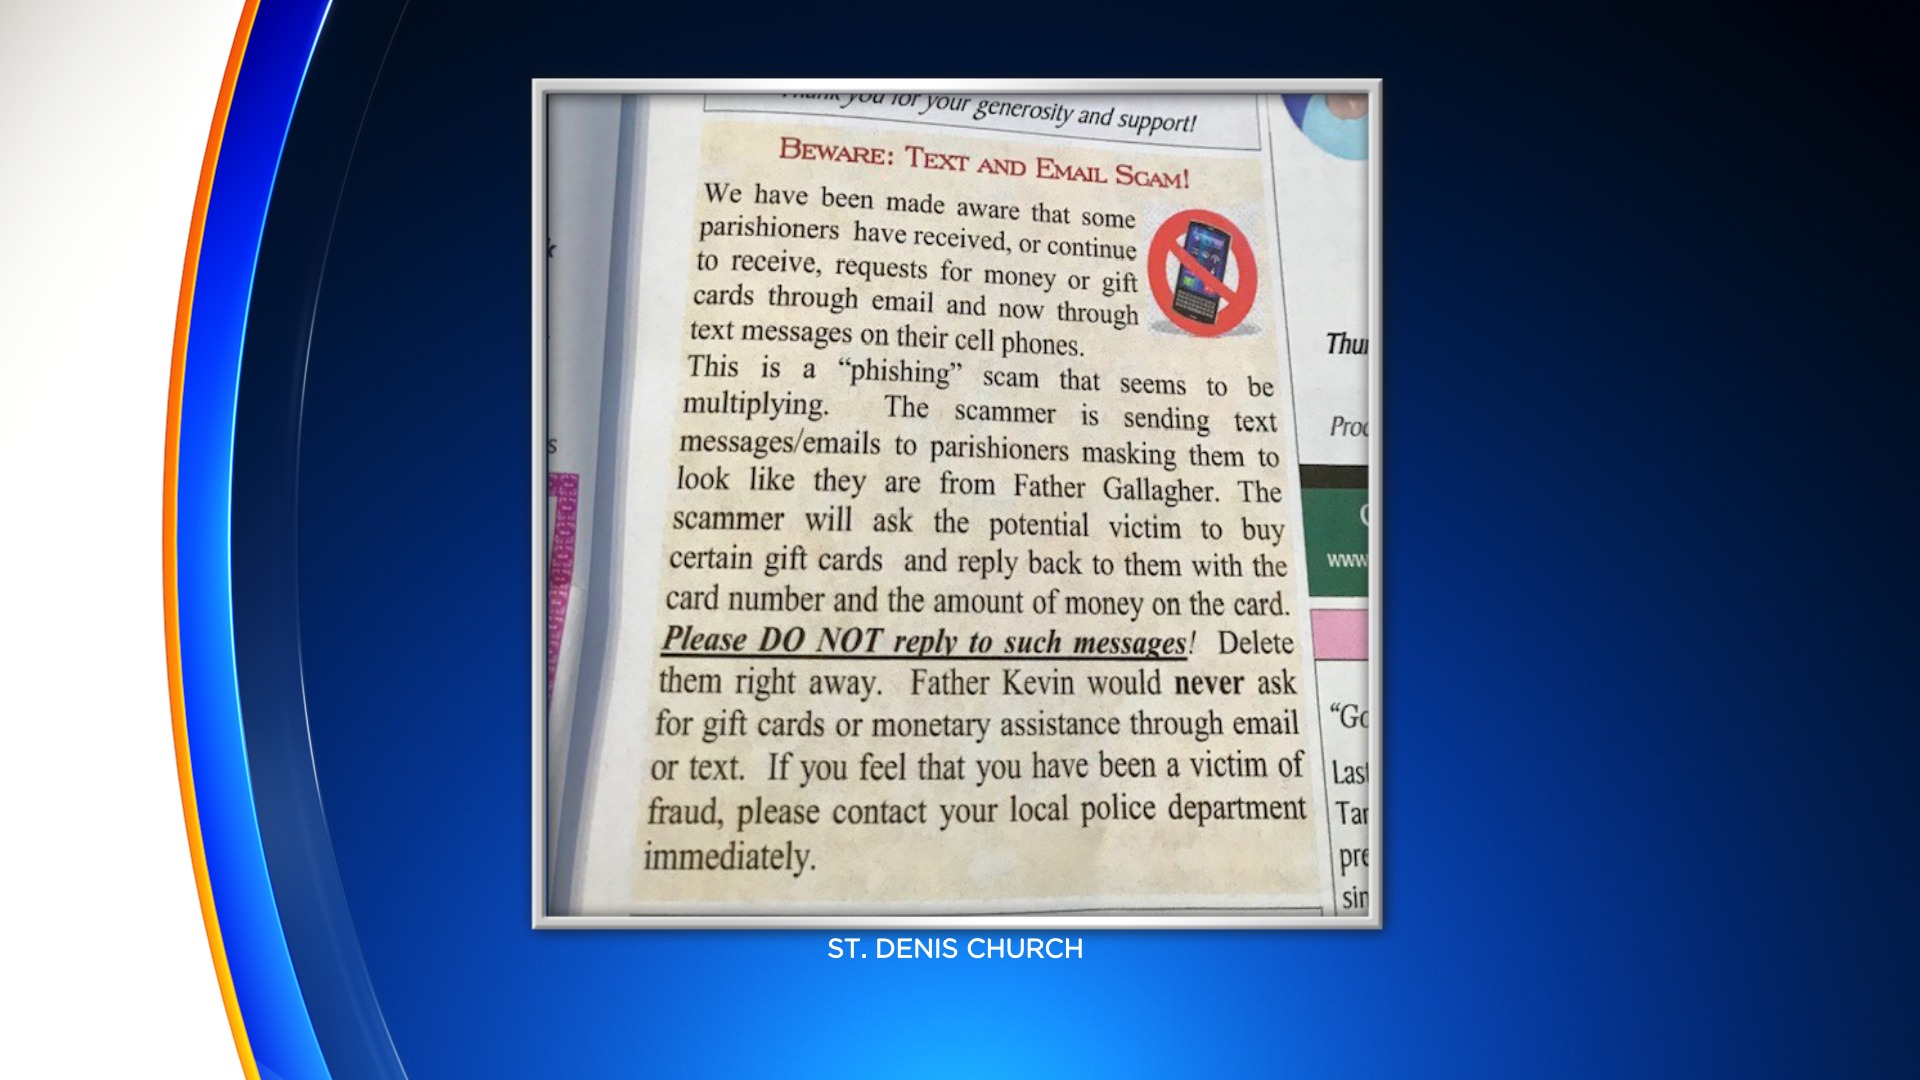 St. Denis Church Officials Warn Of Text, Email Scam Targeting Parishioners